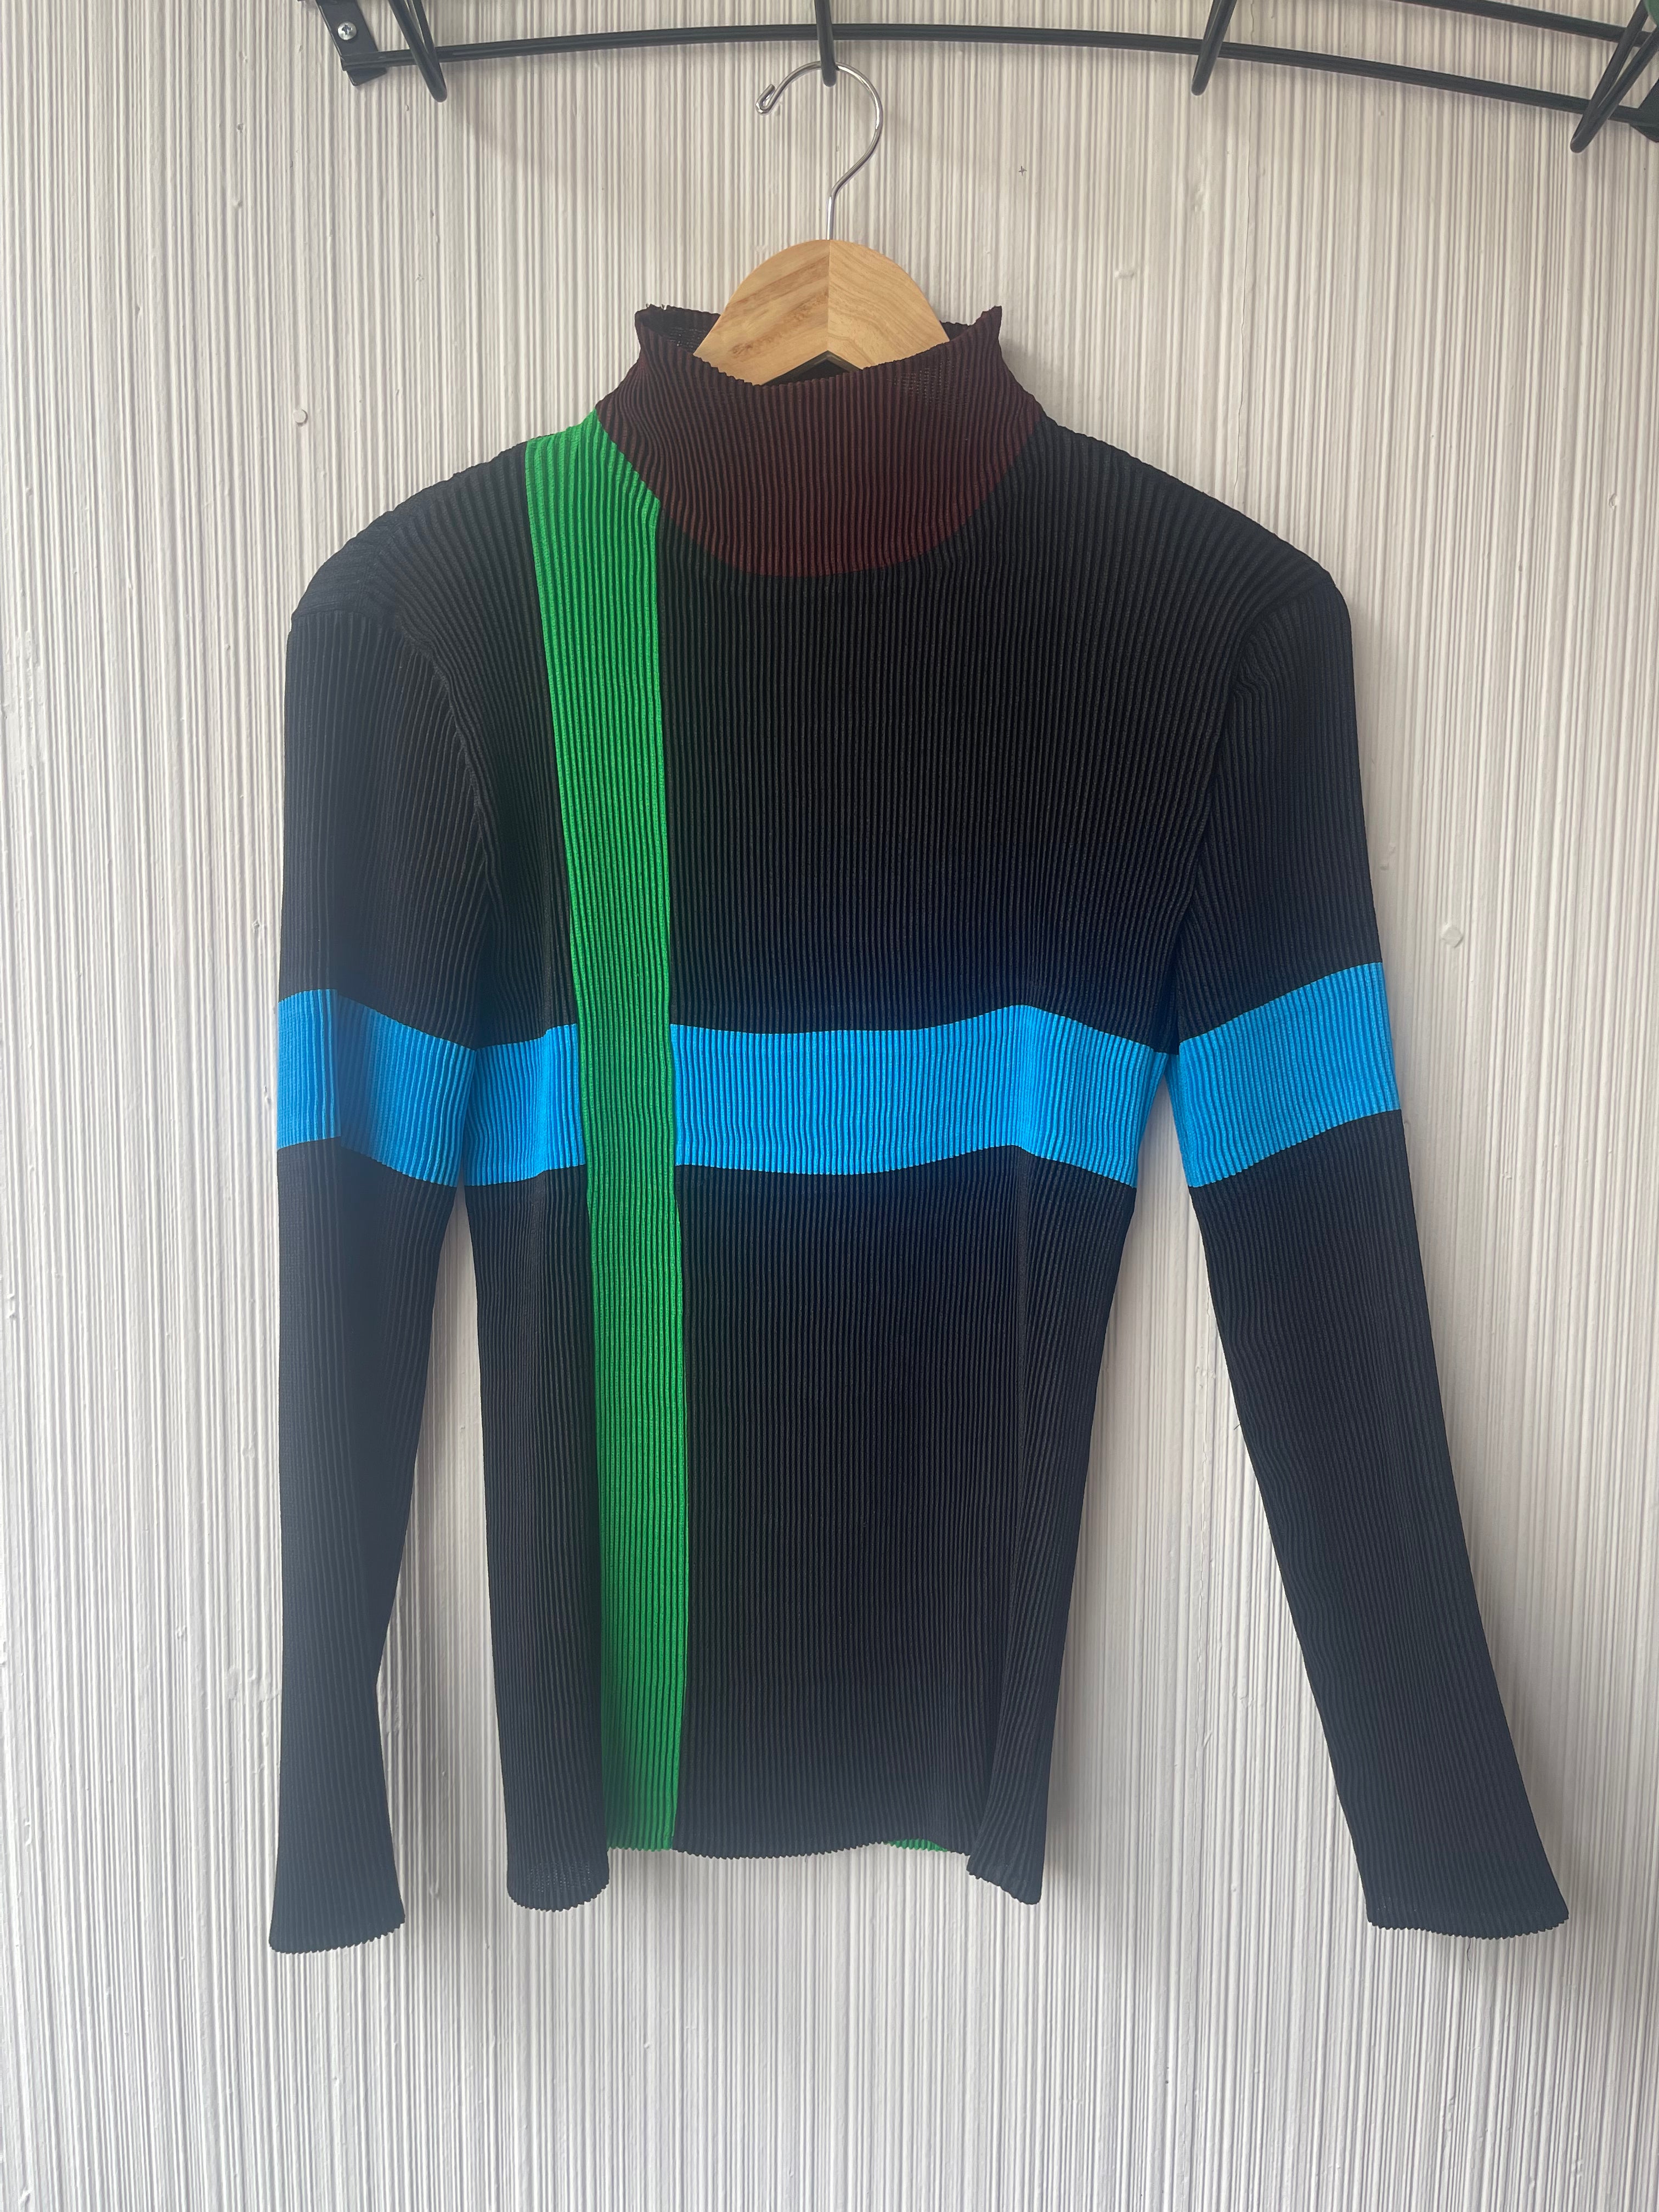 Issey Miyake 90s color block pleated top – Moore Vintage Archive